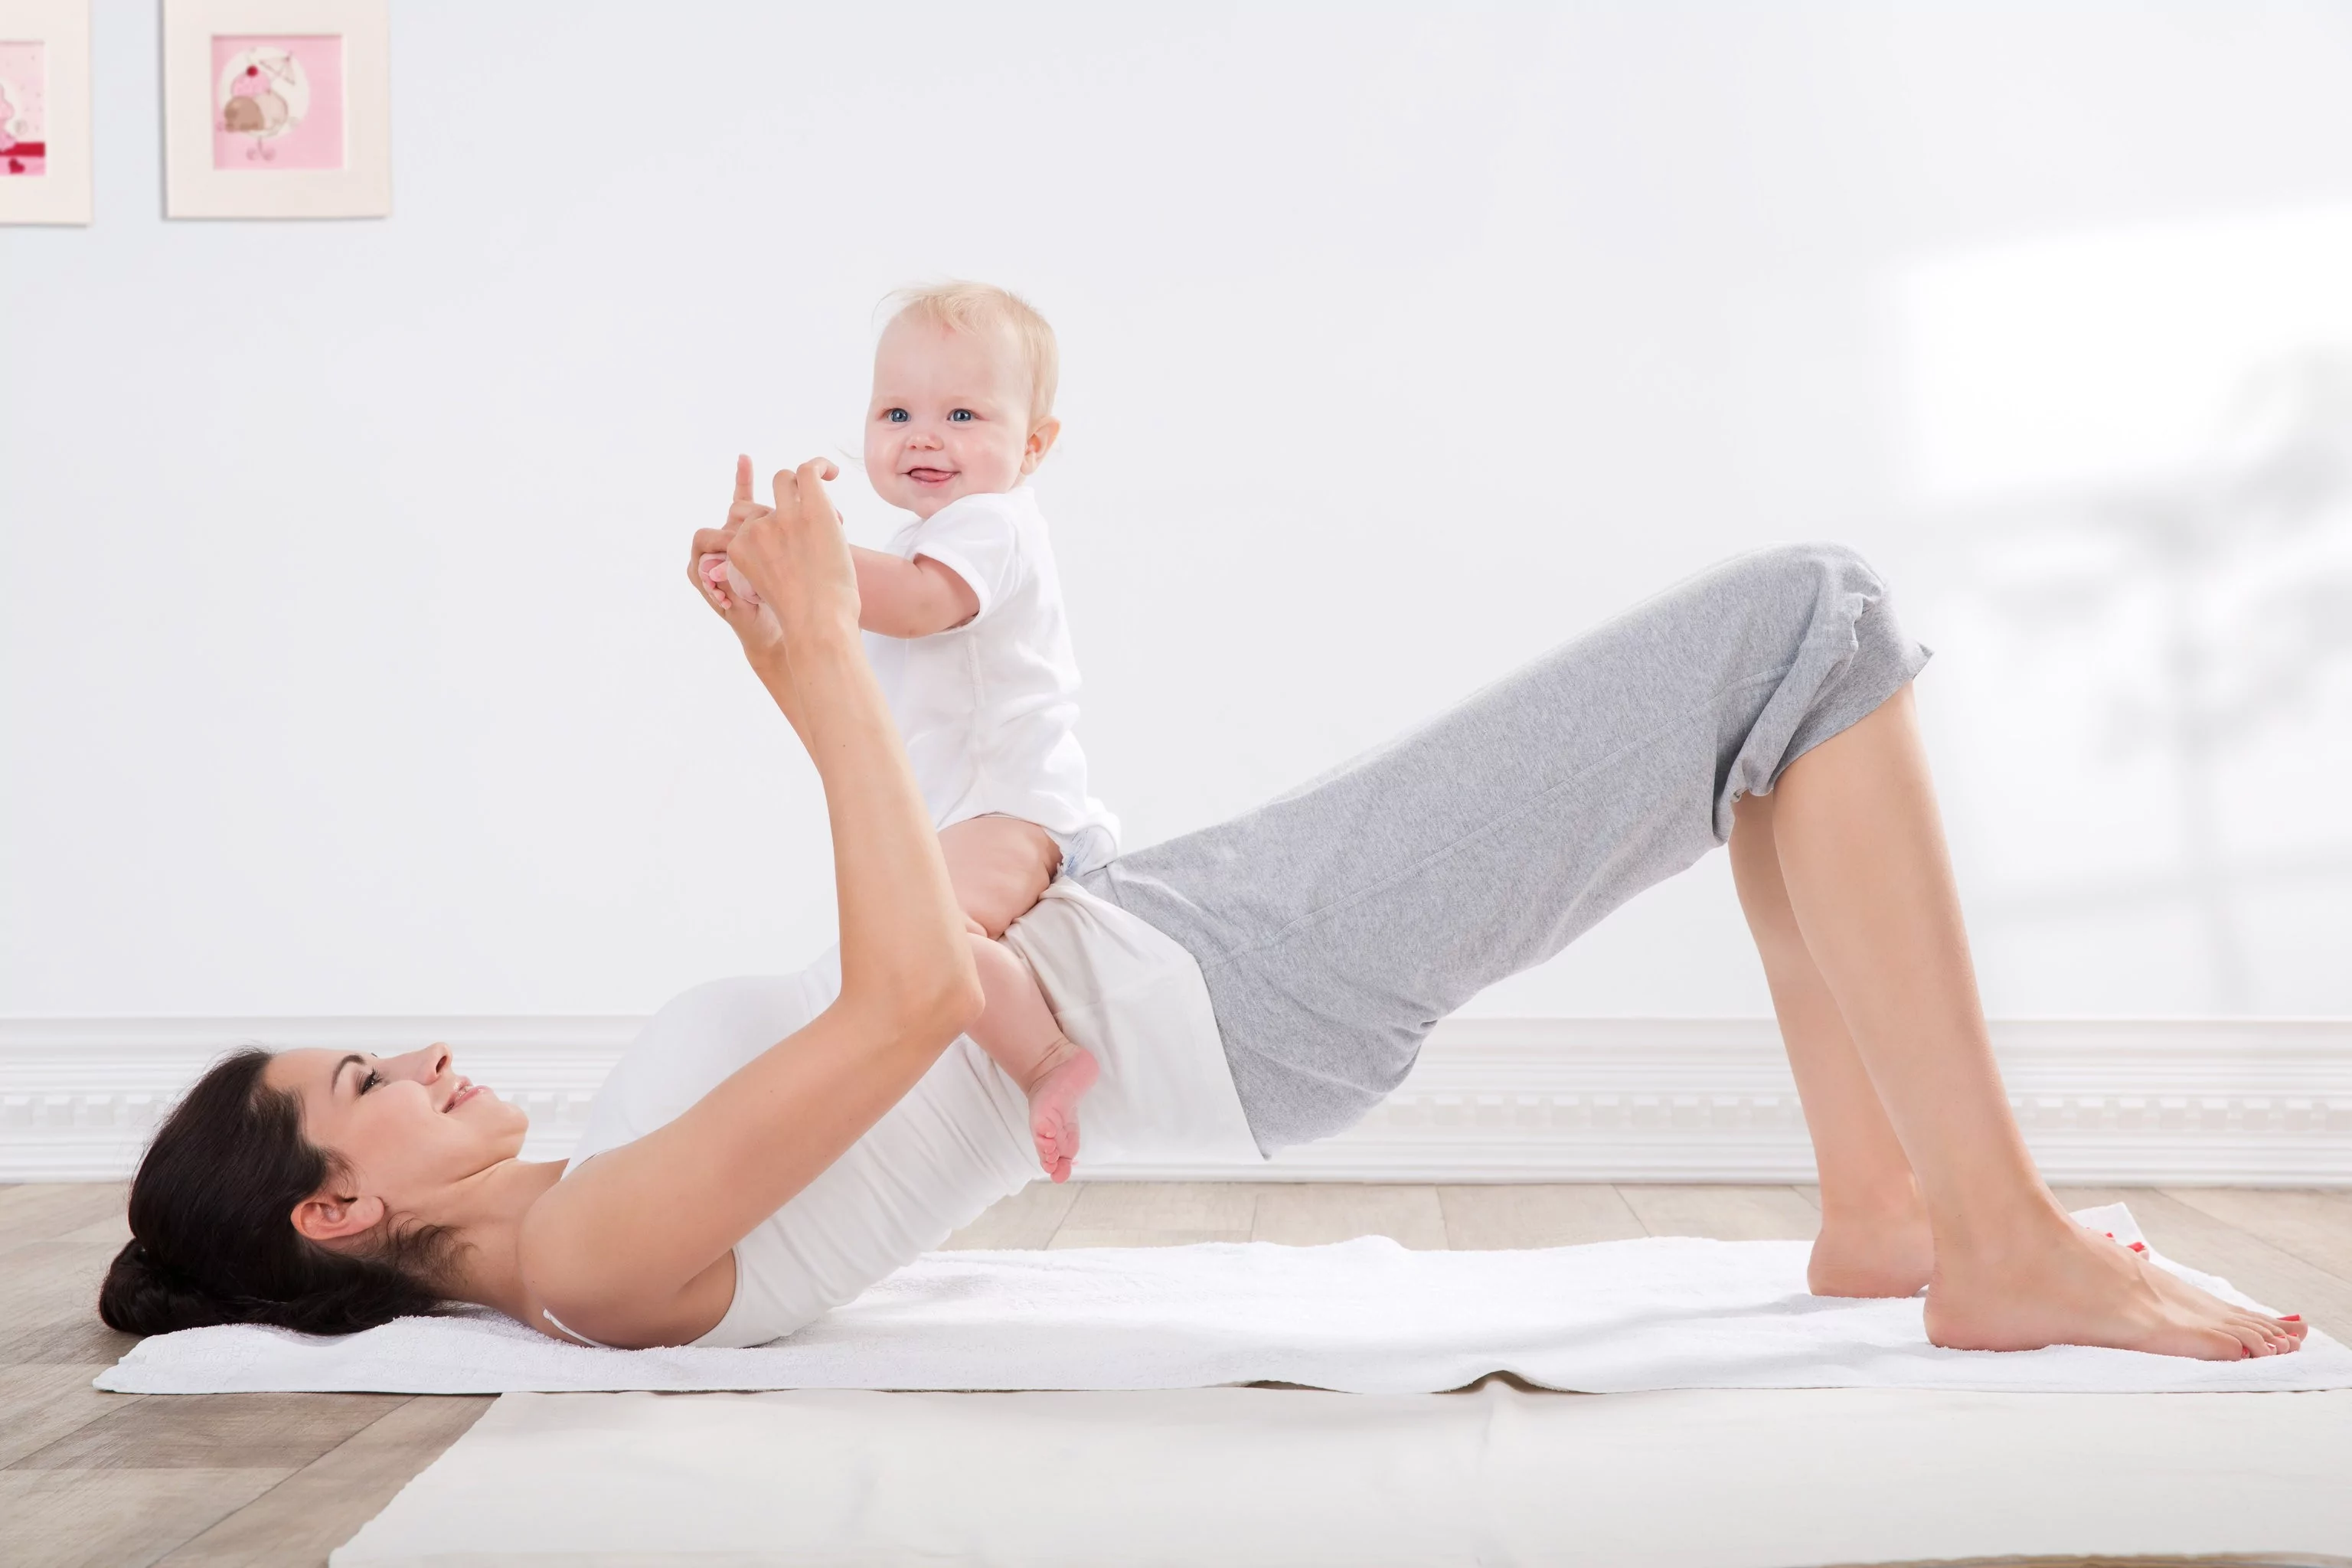 7 Best Ways to Get Back into Shape after Giving Birth